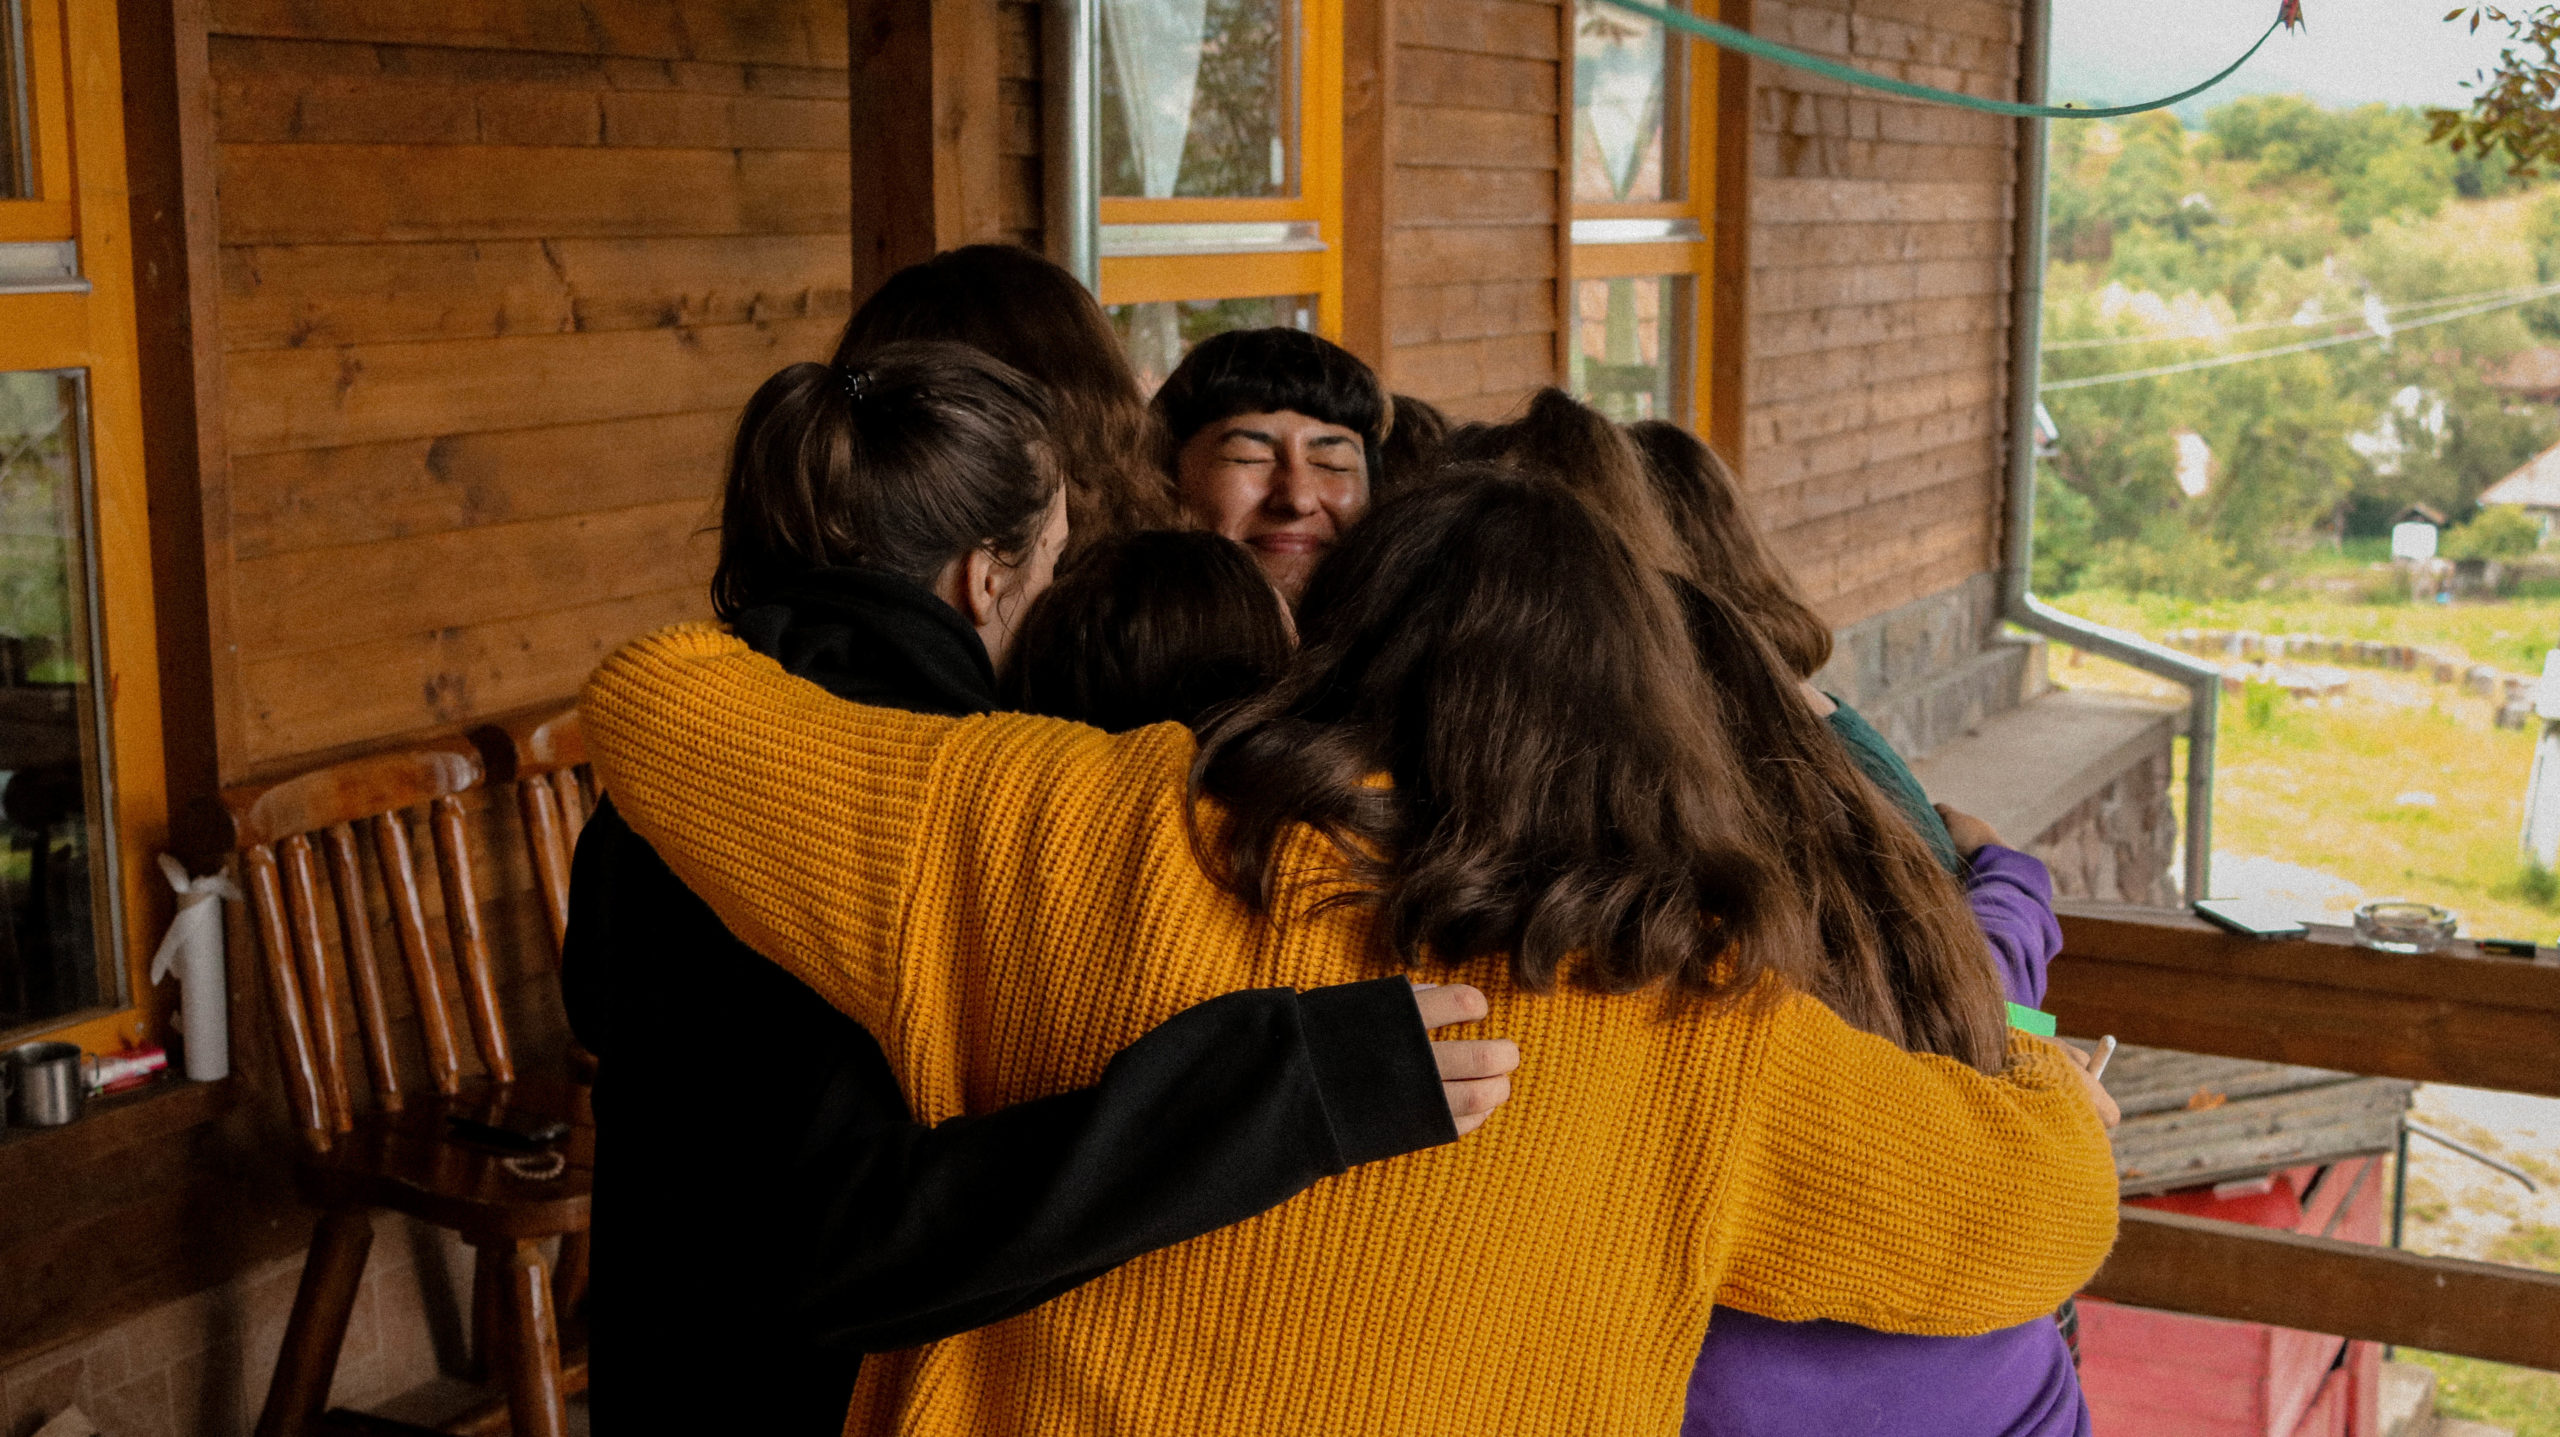 ROMANIA The Camp for Sisterhod participants group hug their self defense trainer scaled